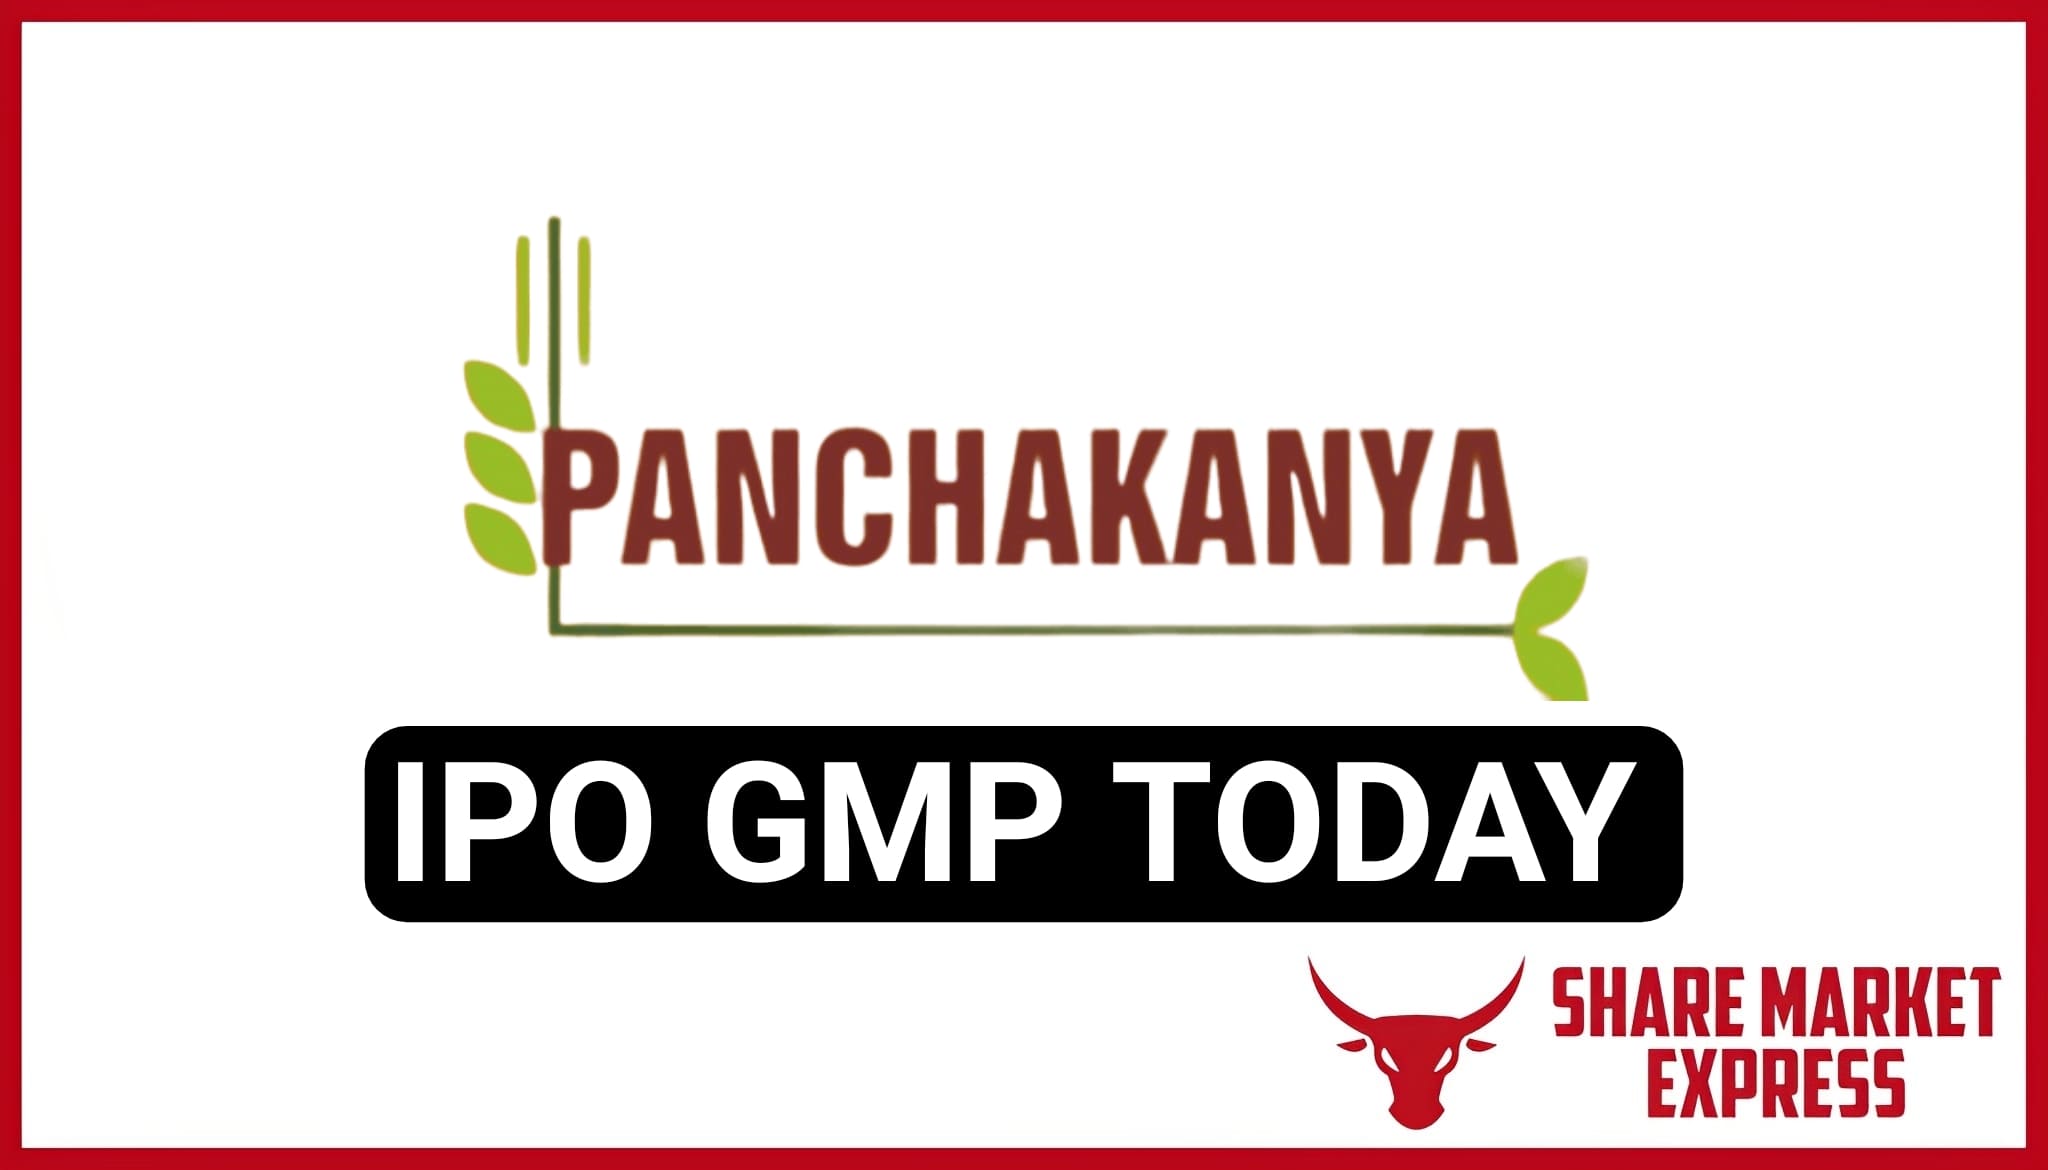 baba food processing ipo gmp today